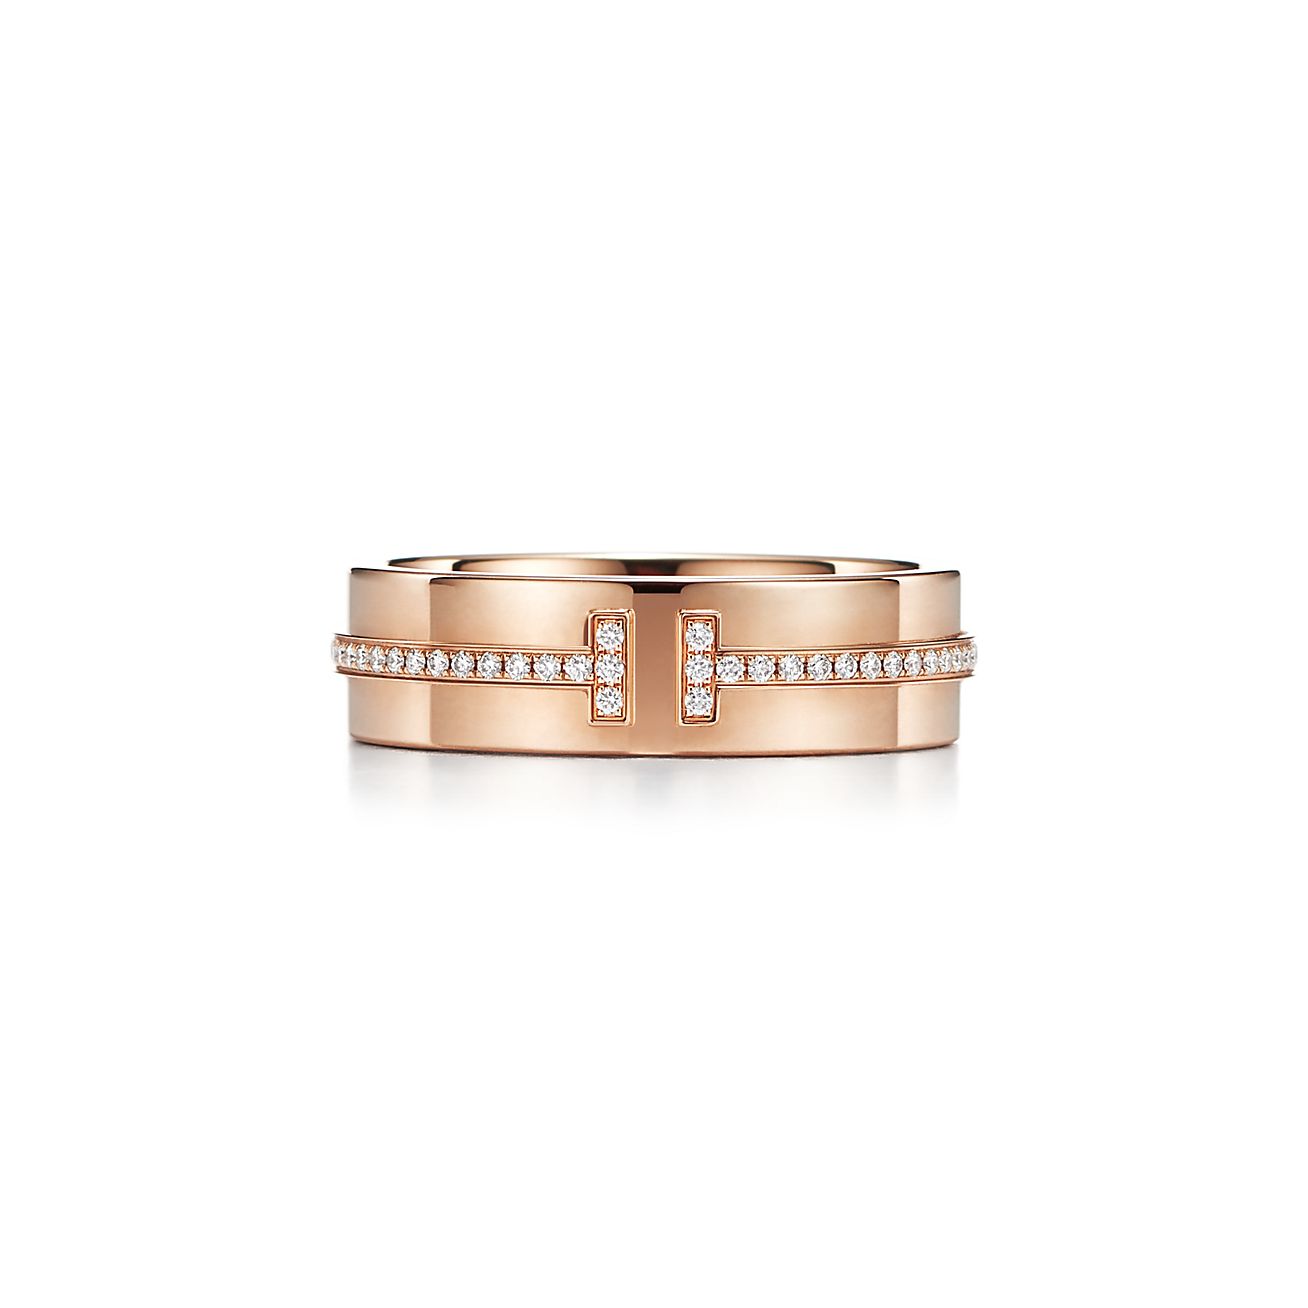 tiffany and co ring rose gold